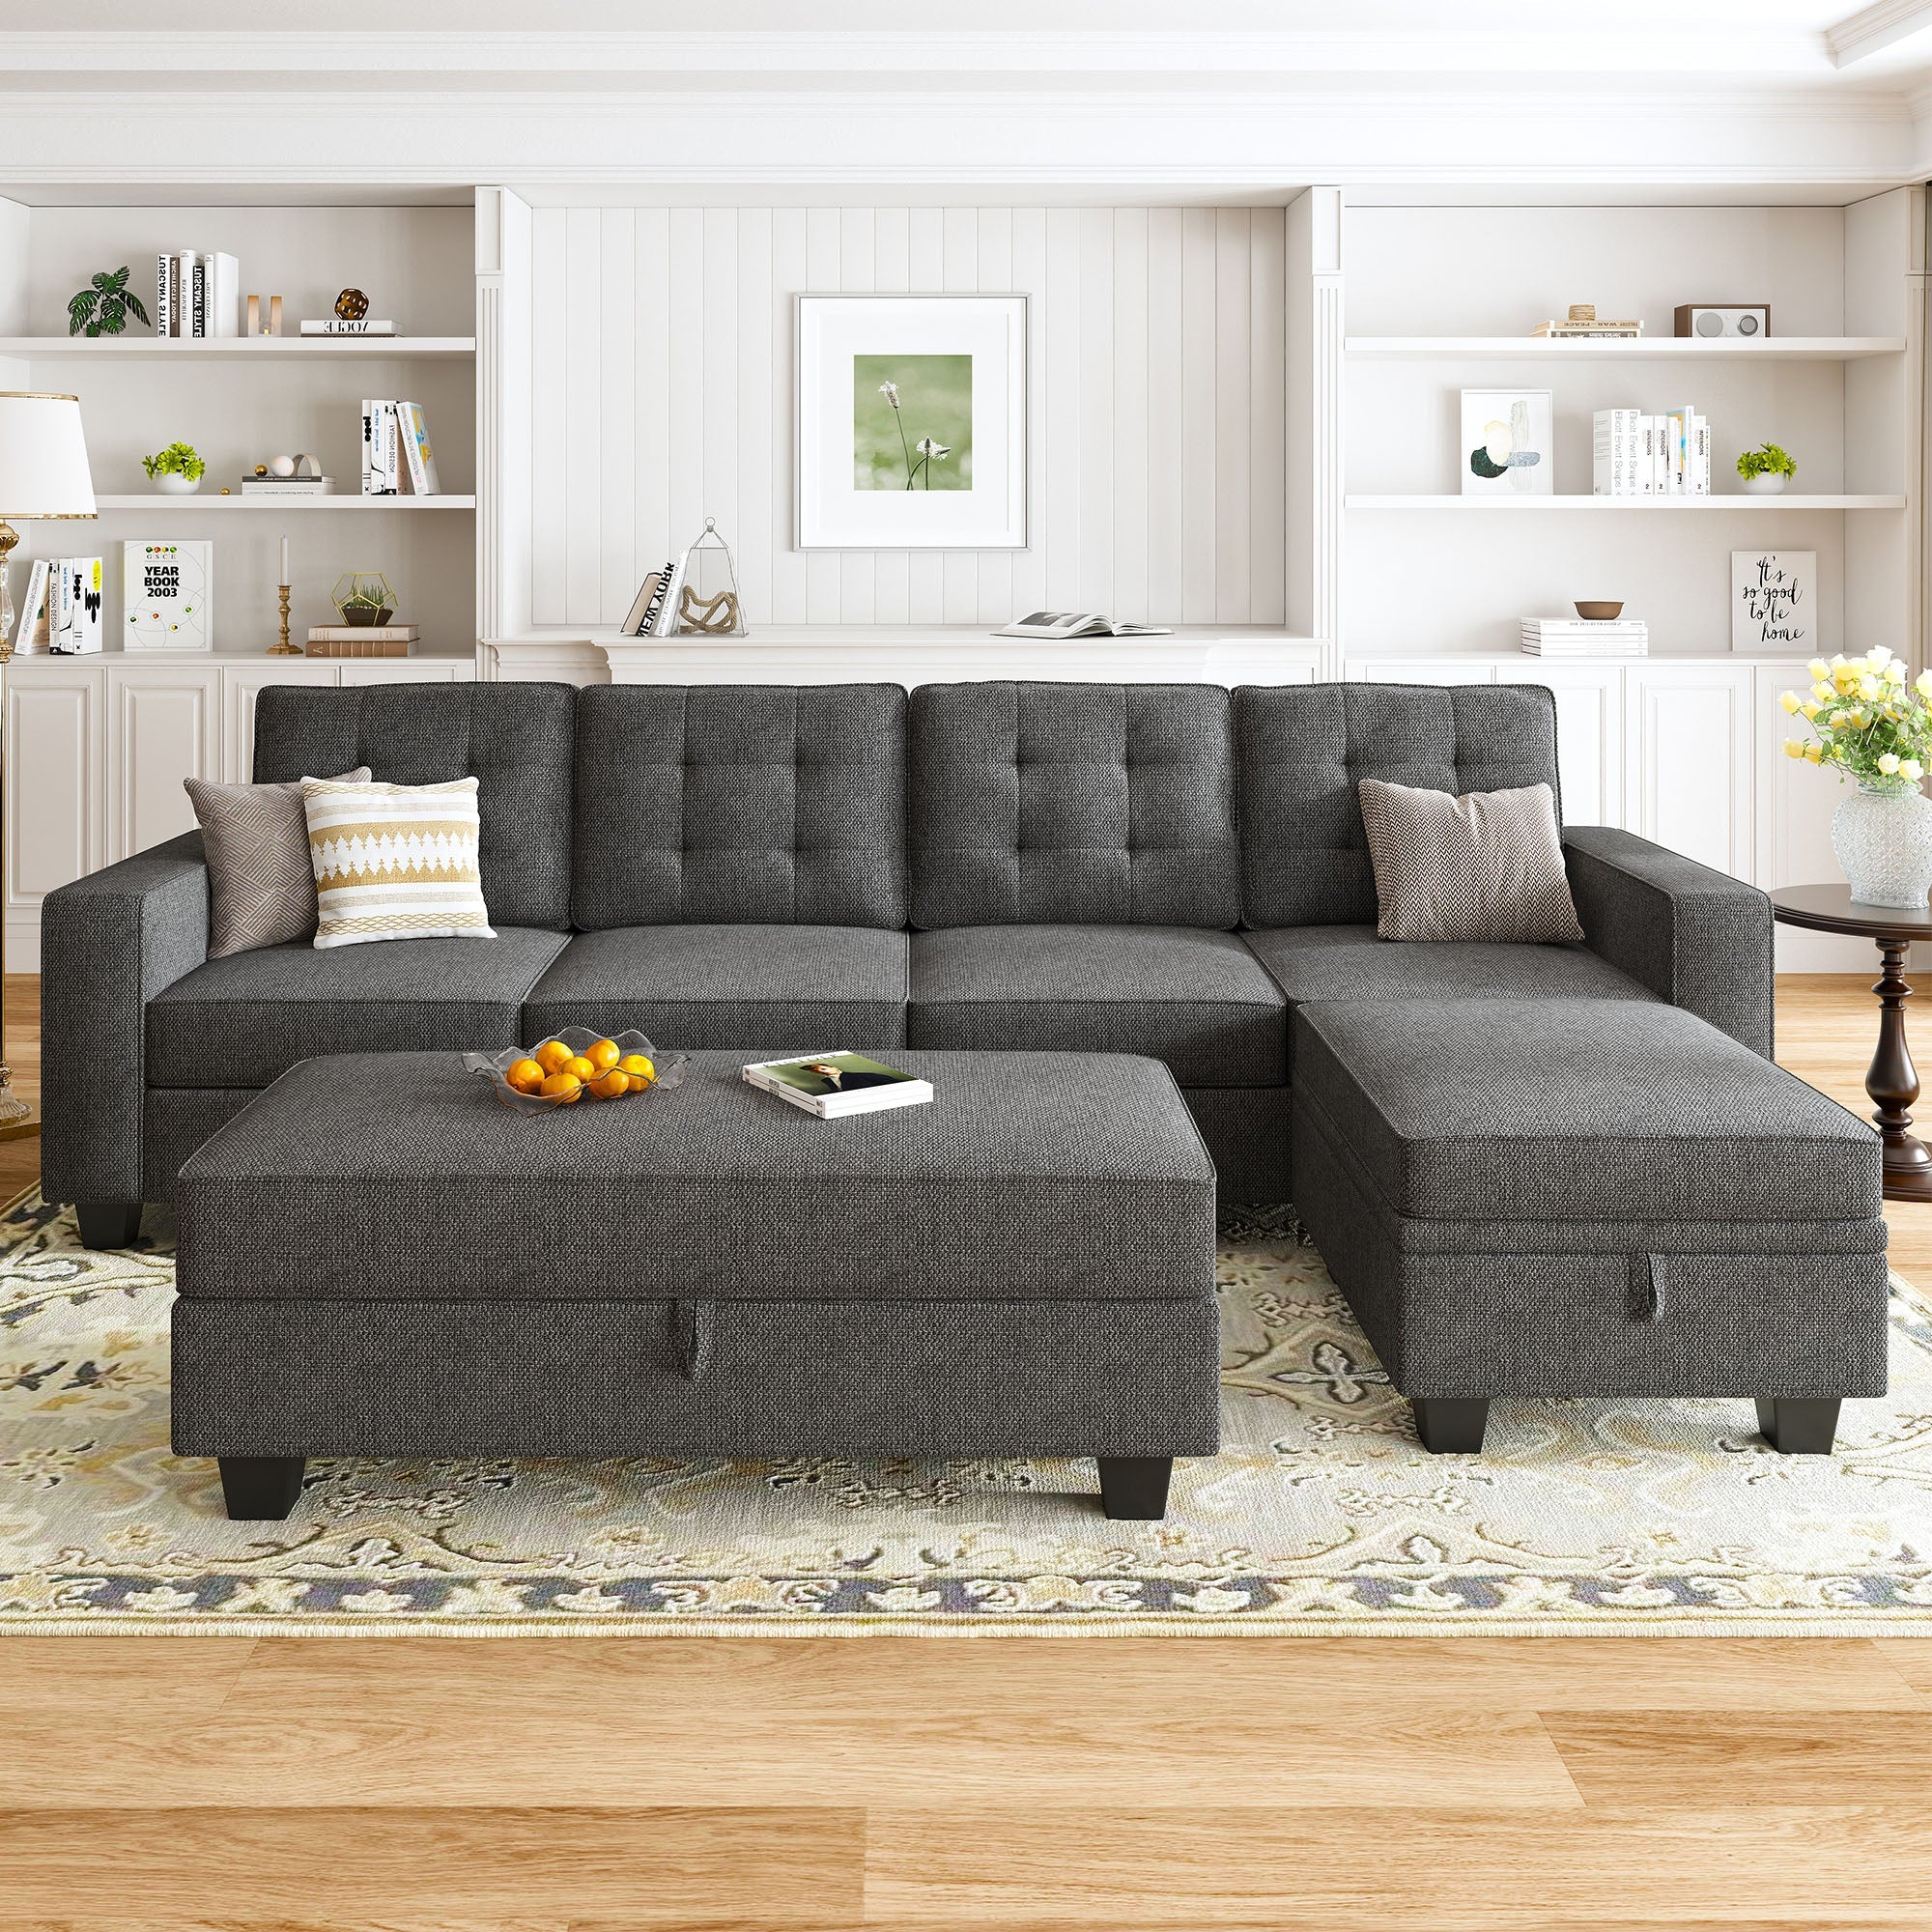 HONBAY 6-Piece Linen Convertible Sectional With Storage Ottoman